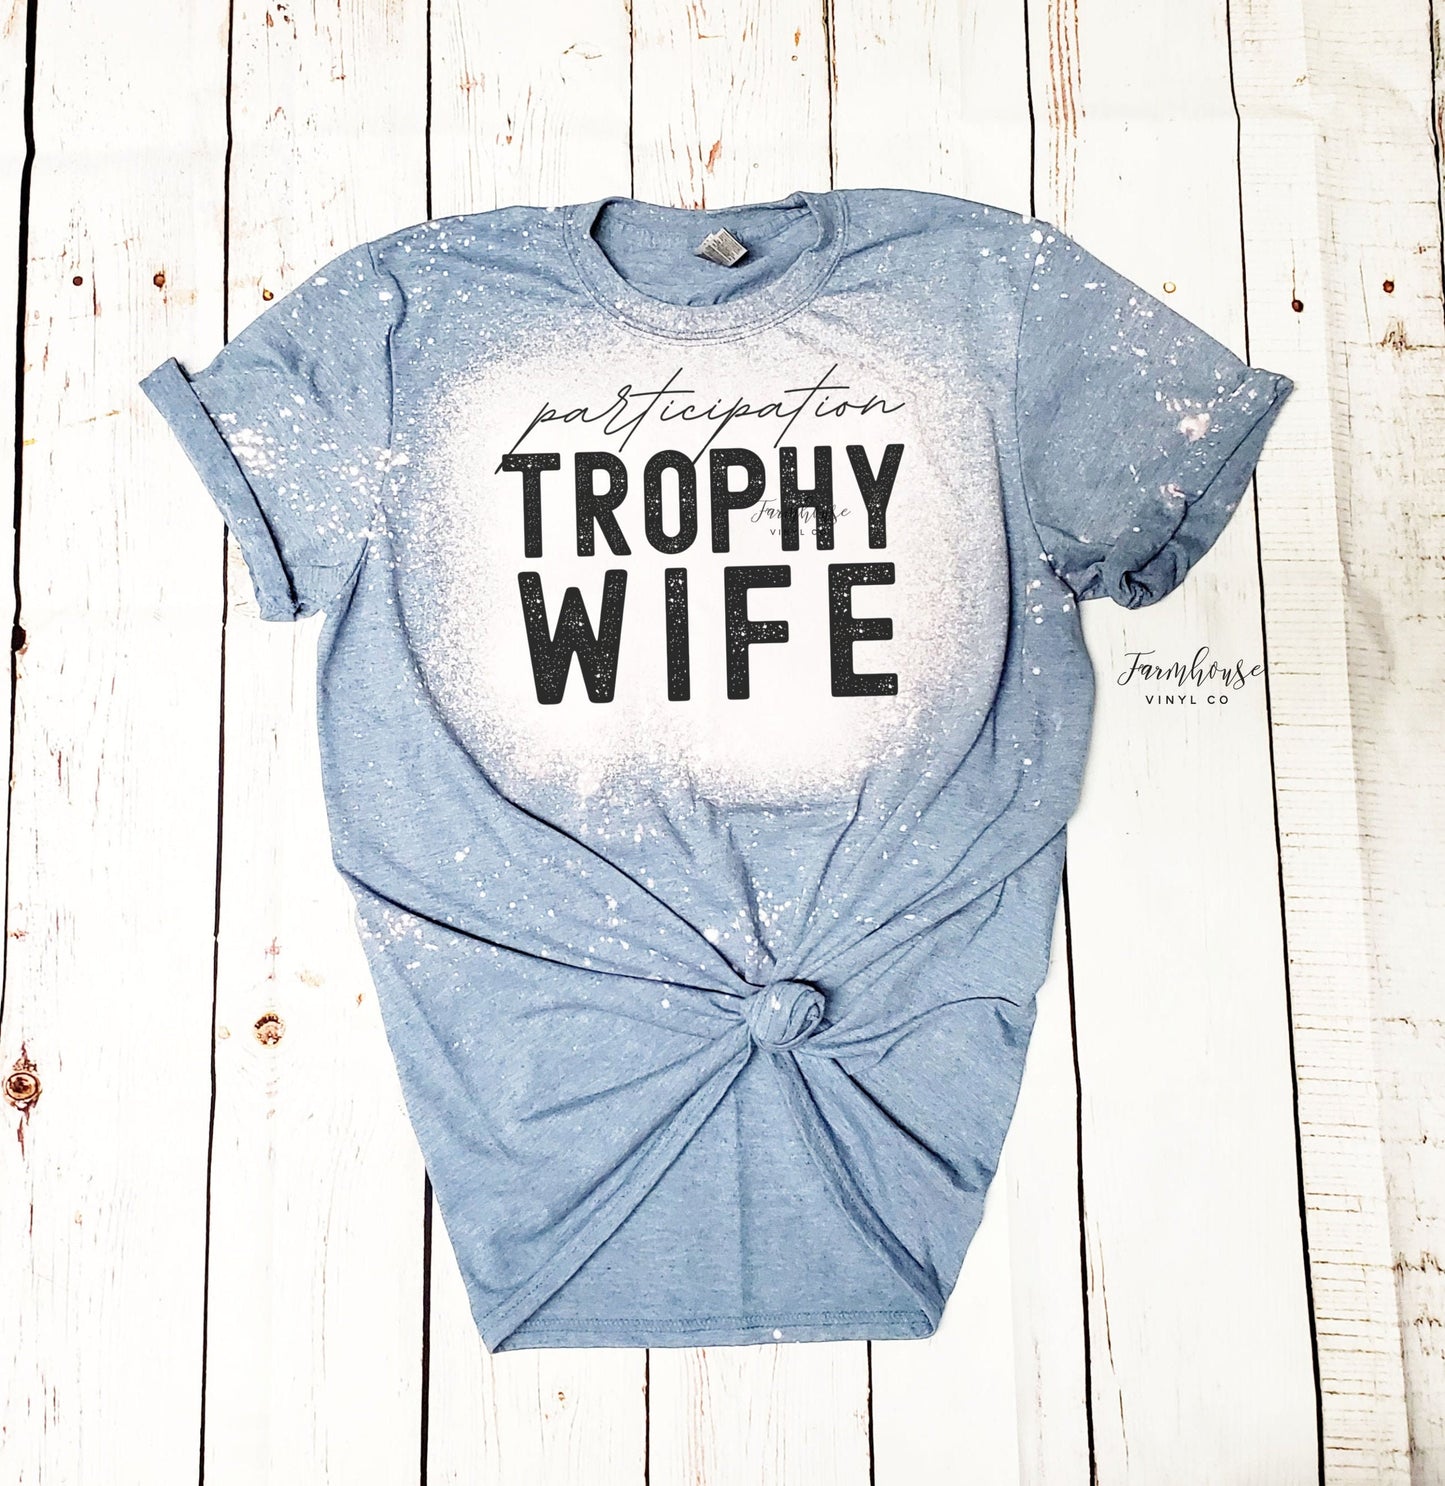 Participation Trophy Wife Bleached Shirt / Womans Tee / Trendy Shirt /  Funny Gift for Wife / Gift for Her / Funn Mom Shirt / Trophy Wife - Farmhouse Vinyl Co